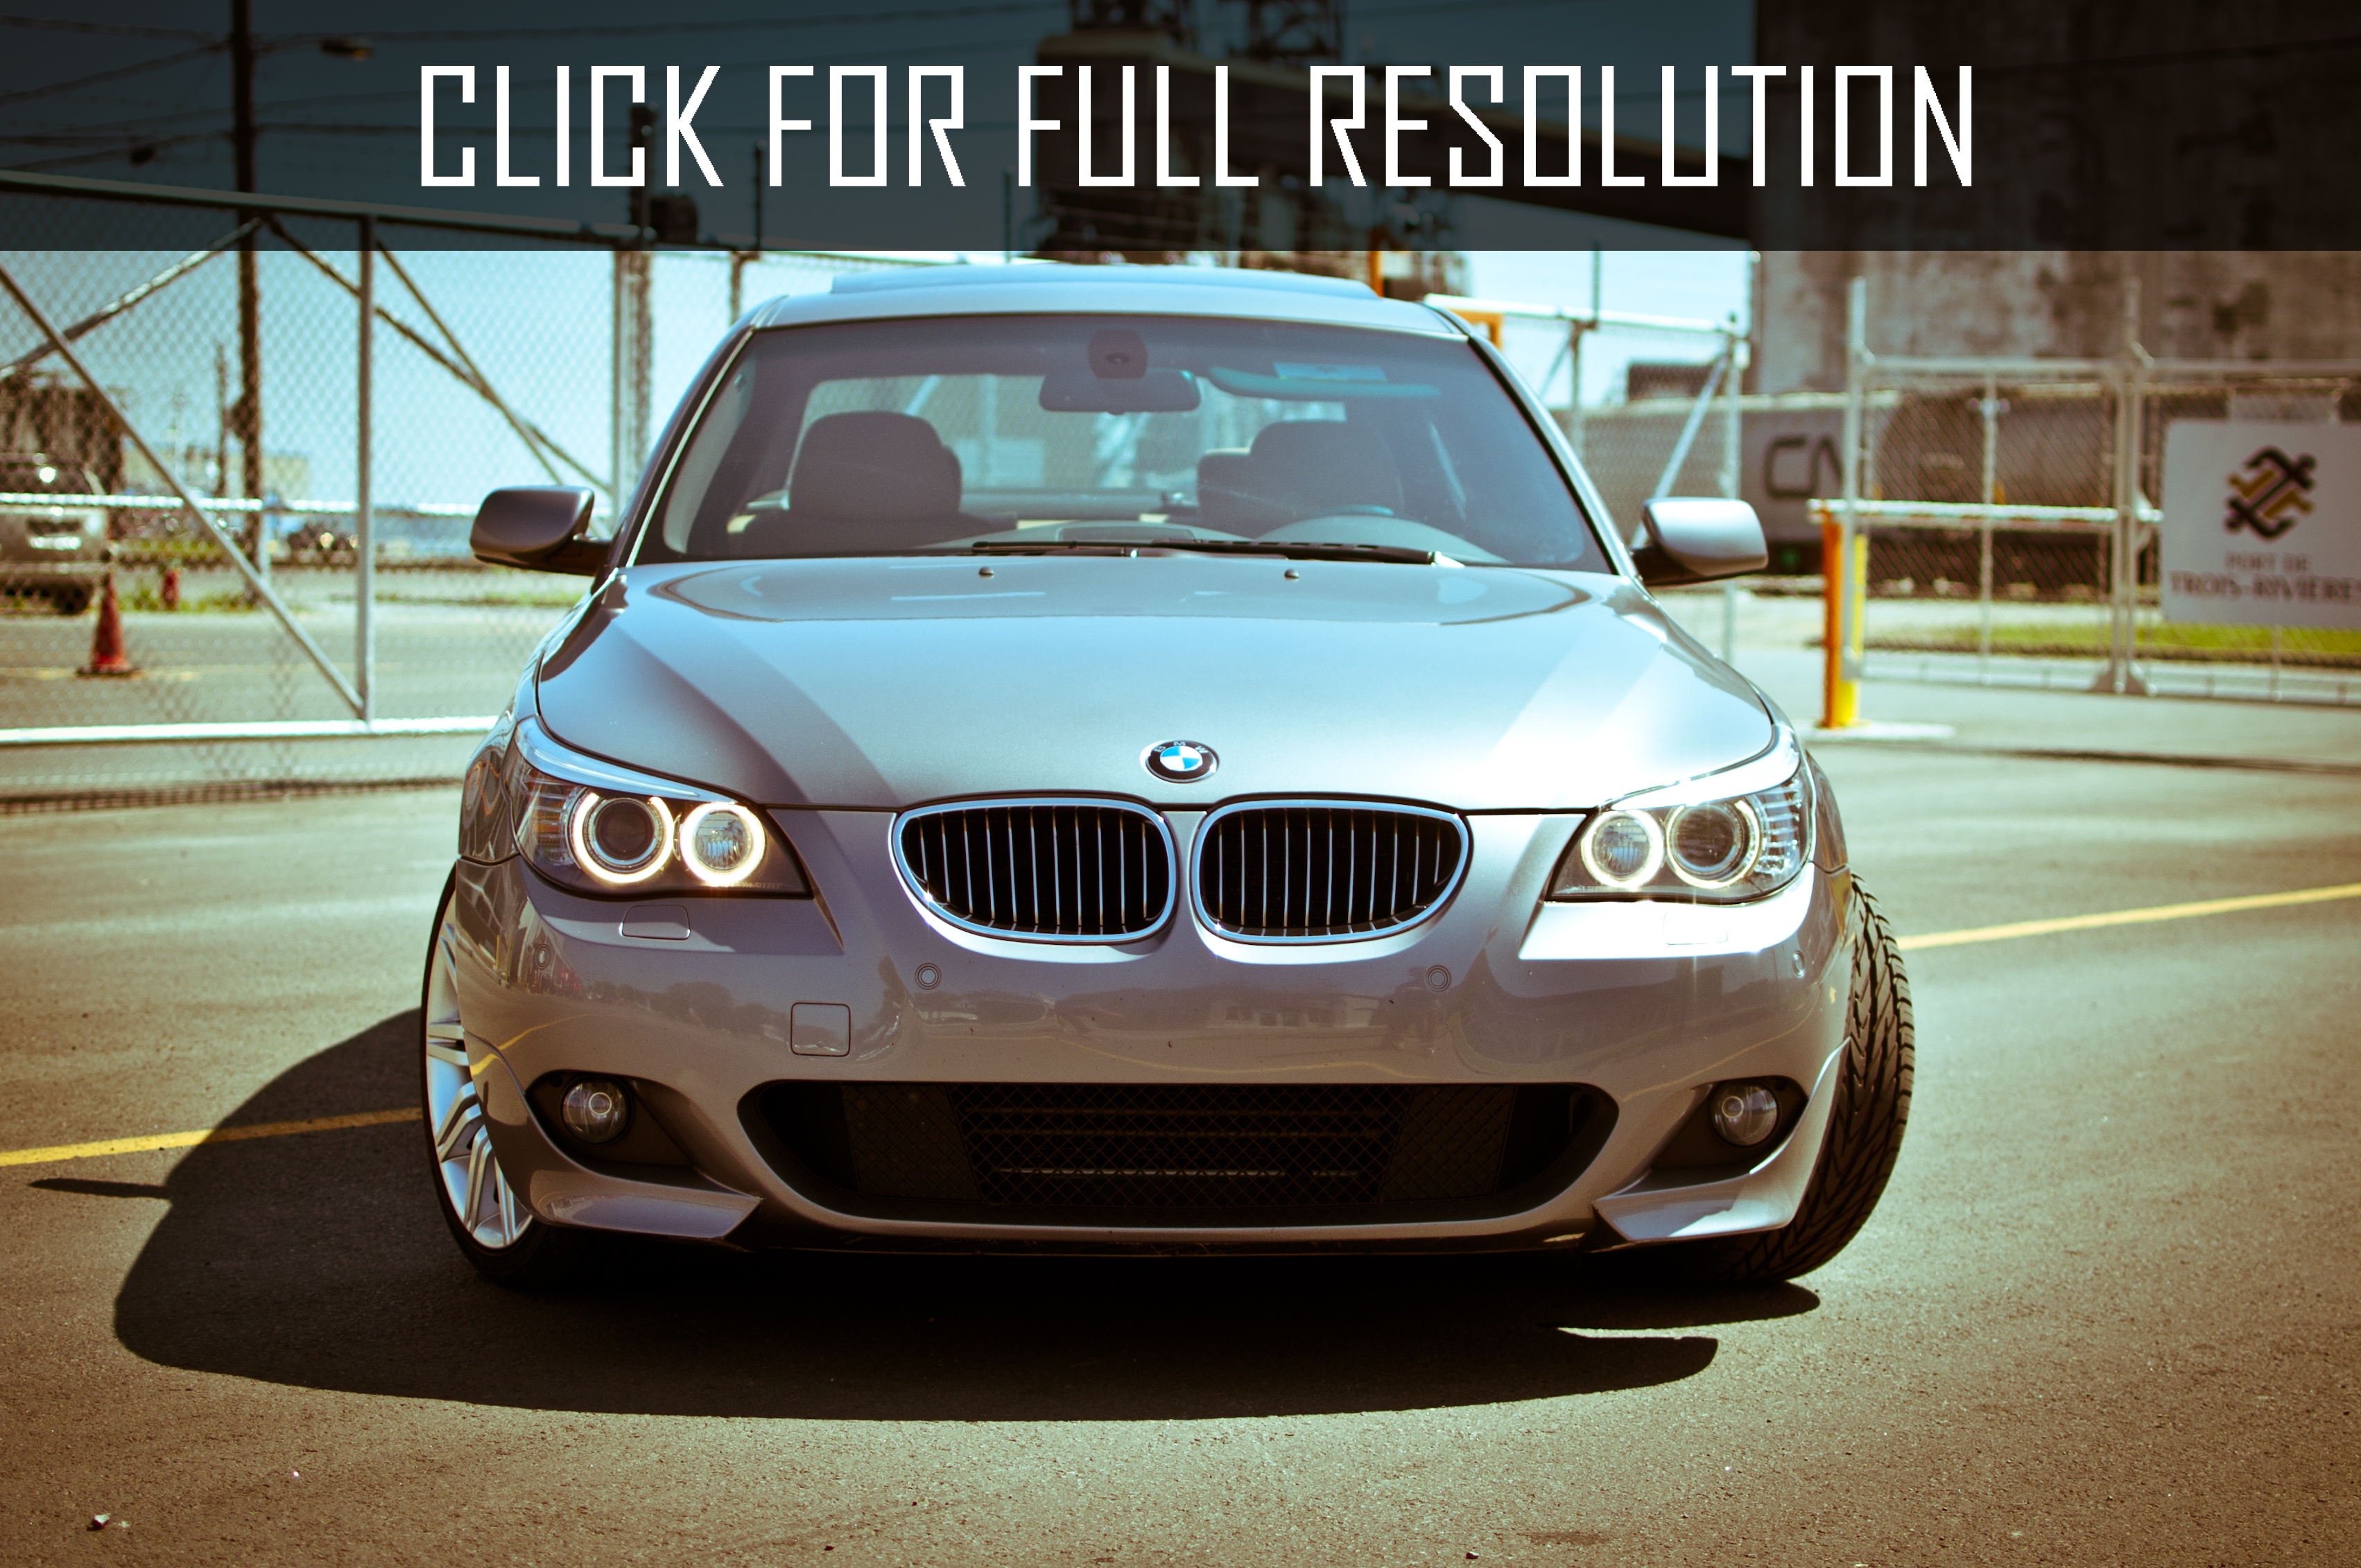 Bmw E60 530d amazing photo gallery, some information and